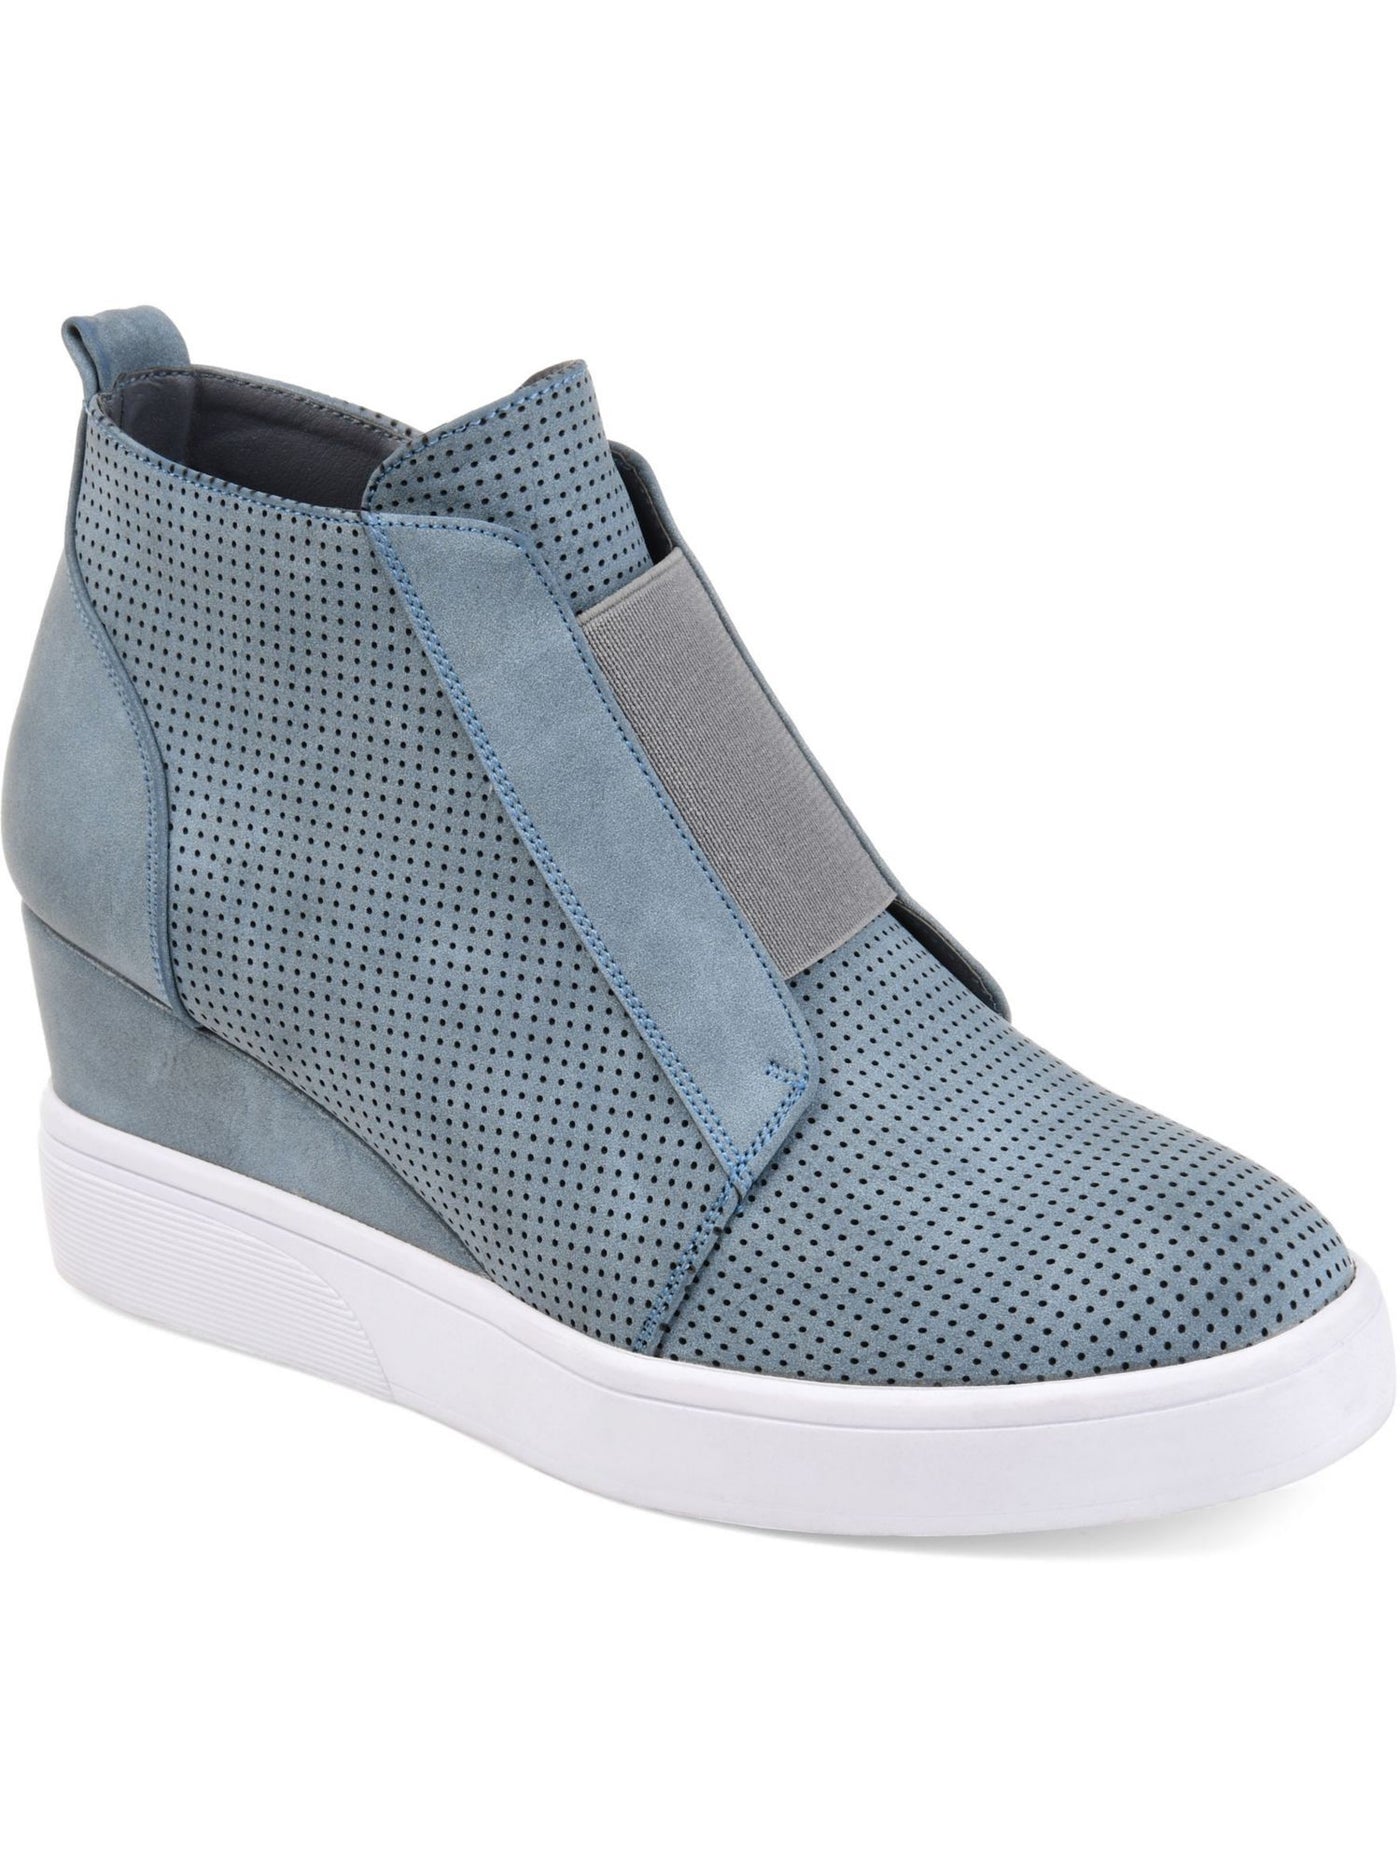 JOURNEE COLLECTION Womens Blue Pinhole Texture 1" Platform Clara Almond Toe Wedge Zip-Up Athletic Sneakers 9 M